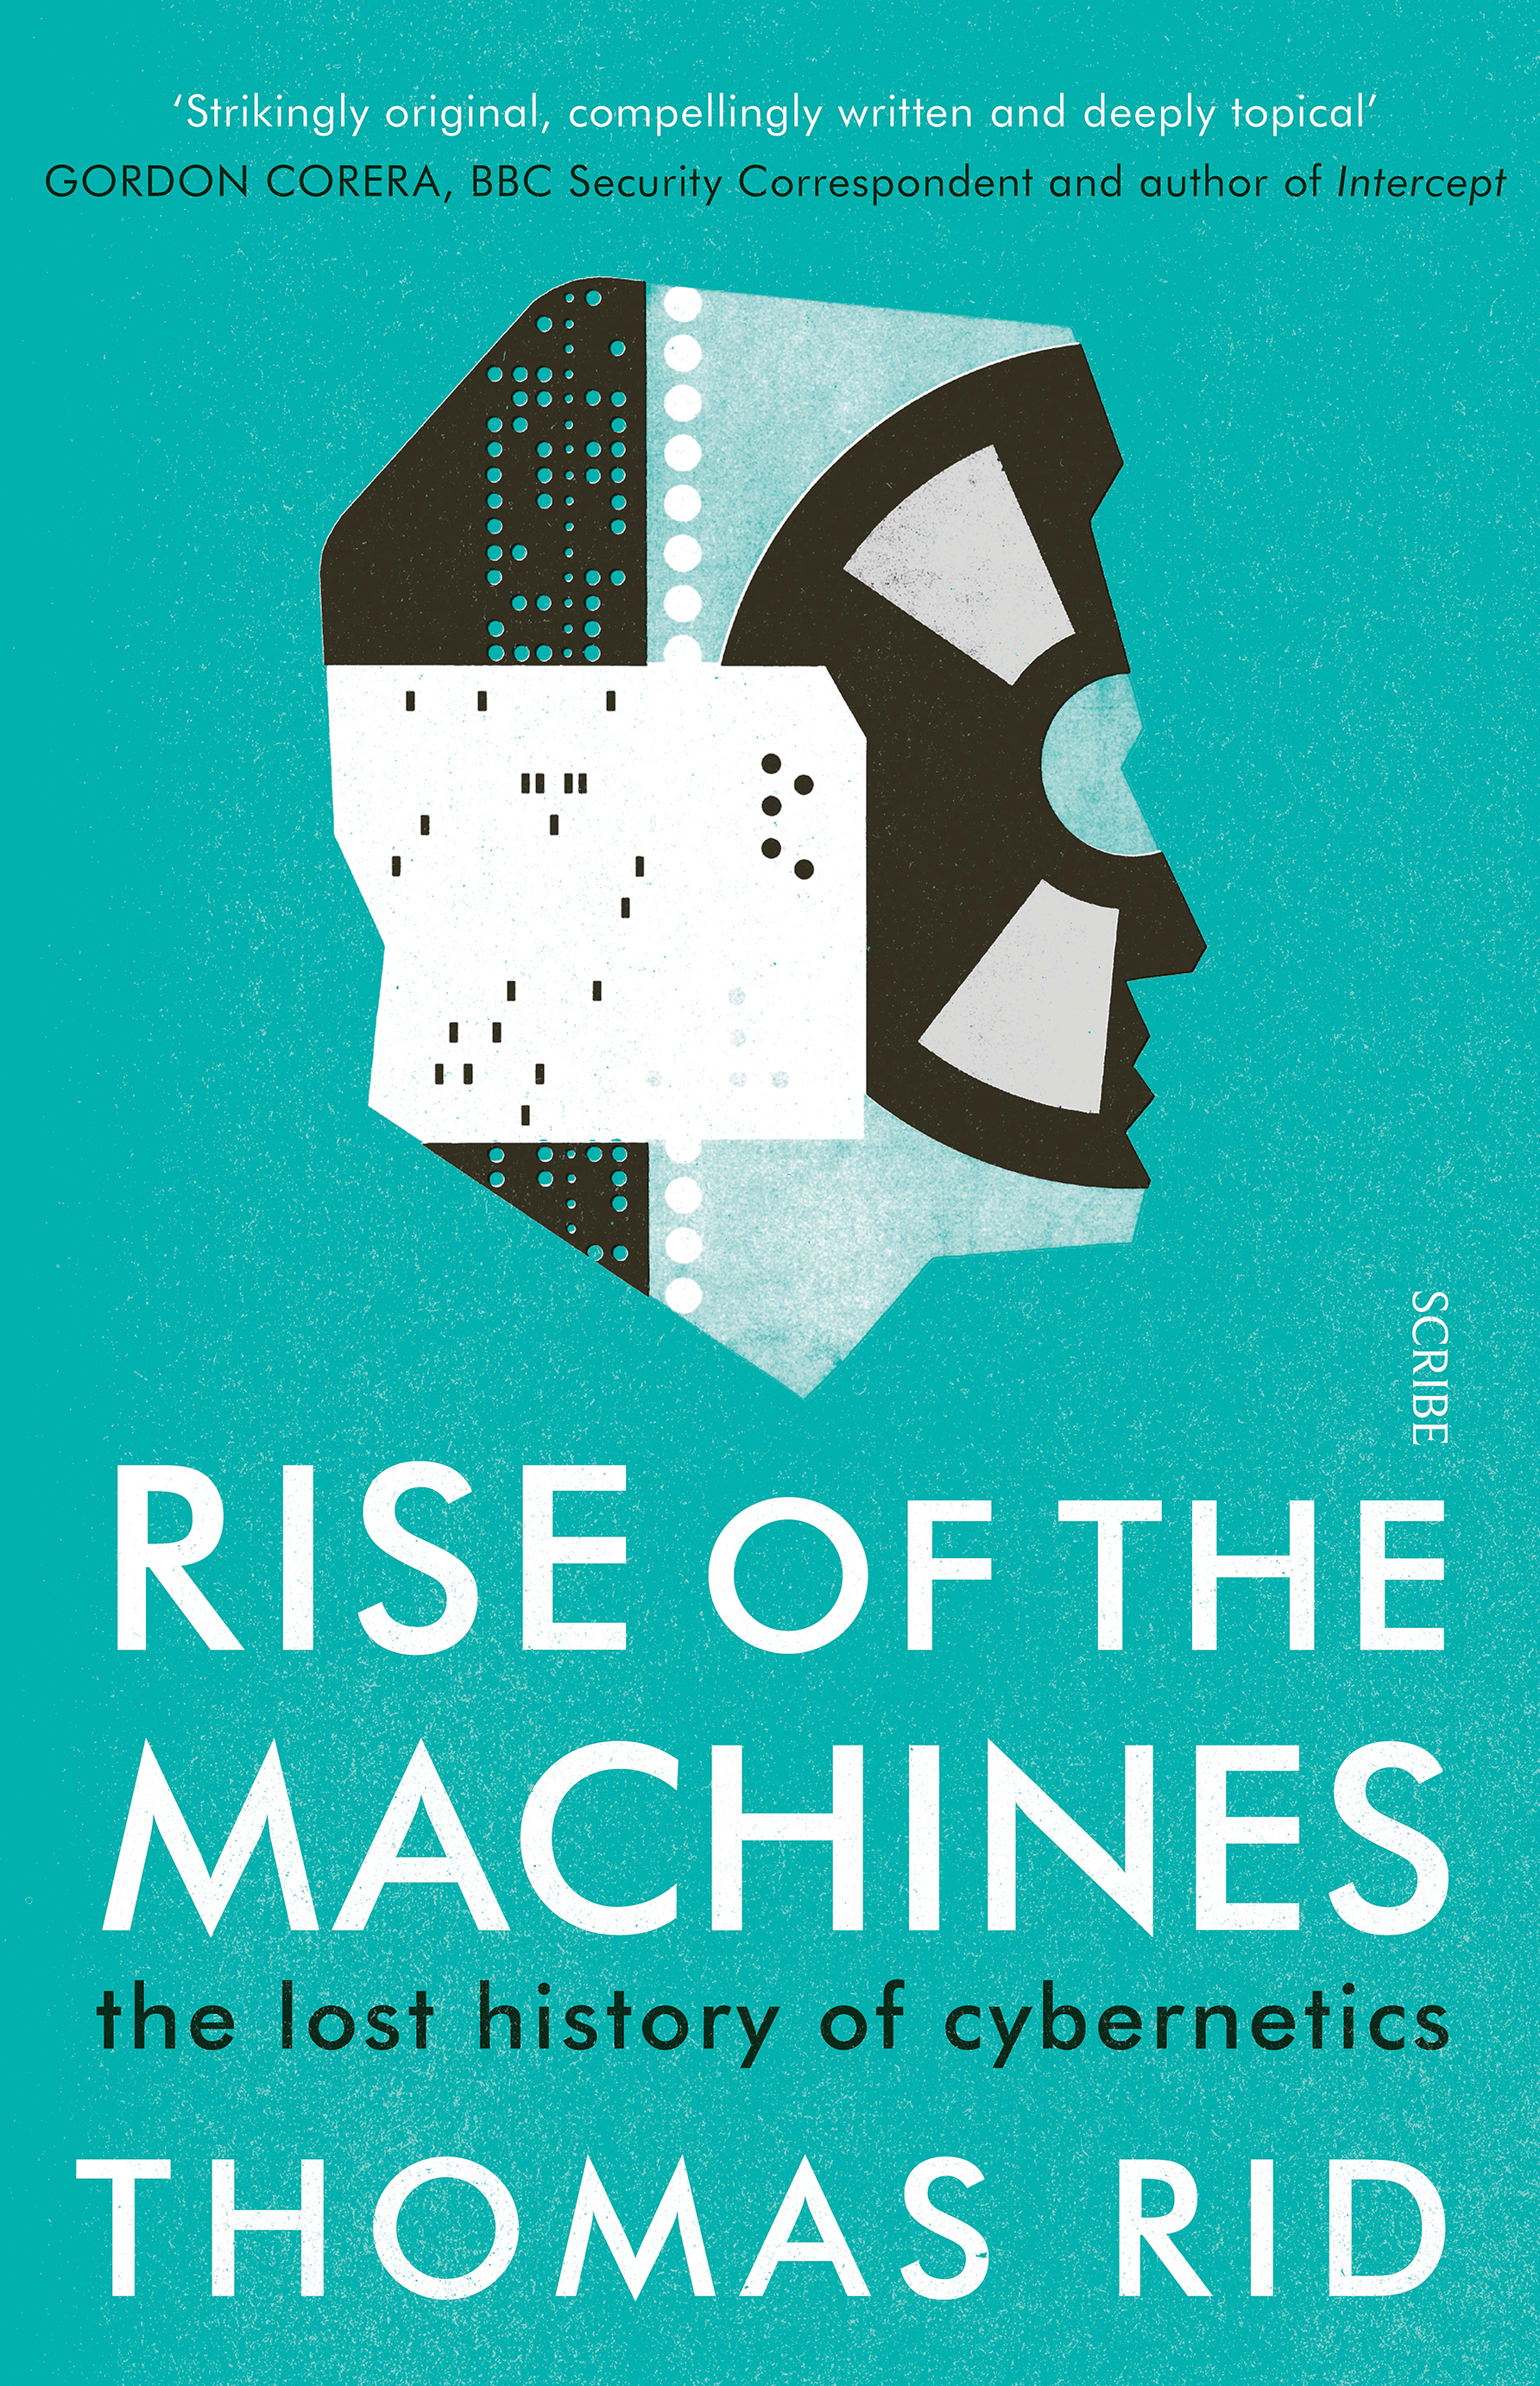 Rise of the Machines: The Lost History of Cybernetics